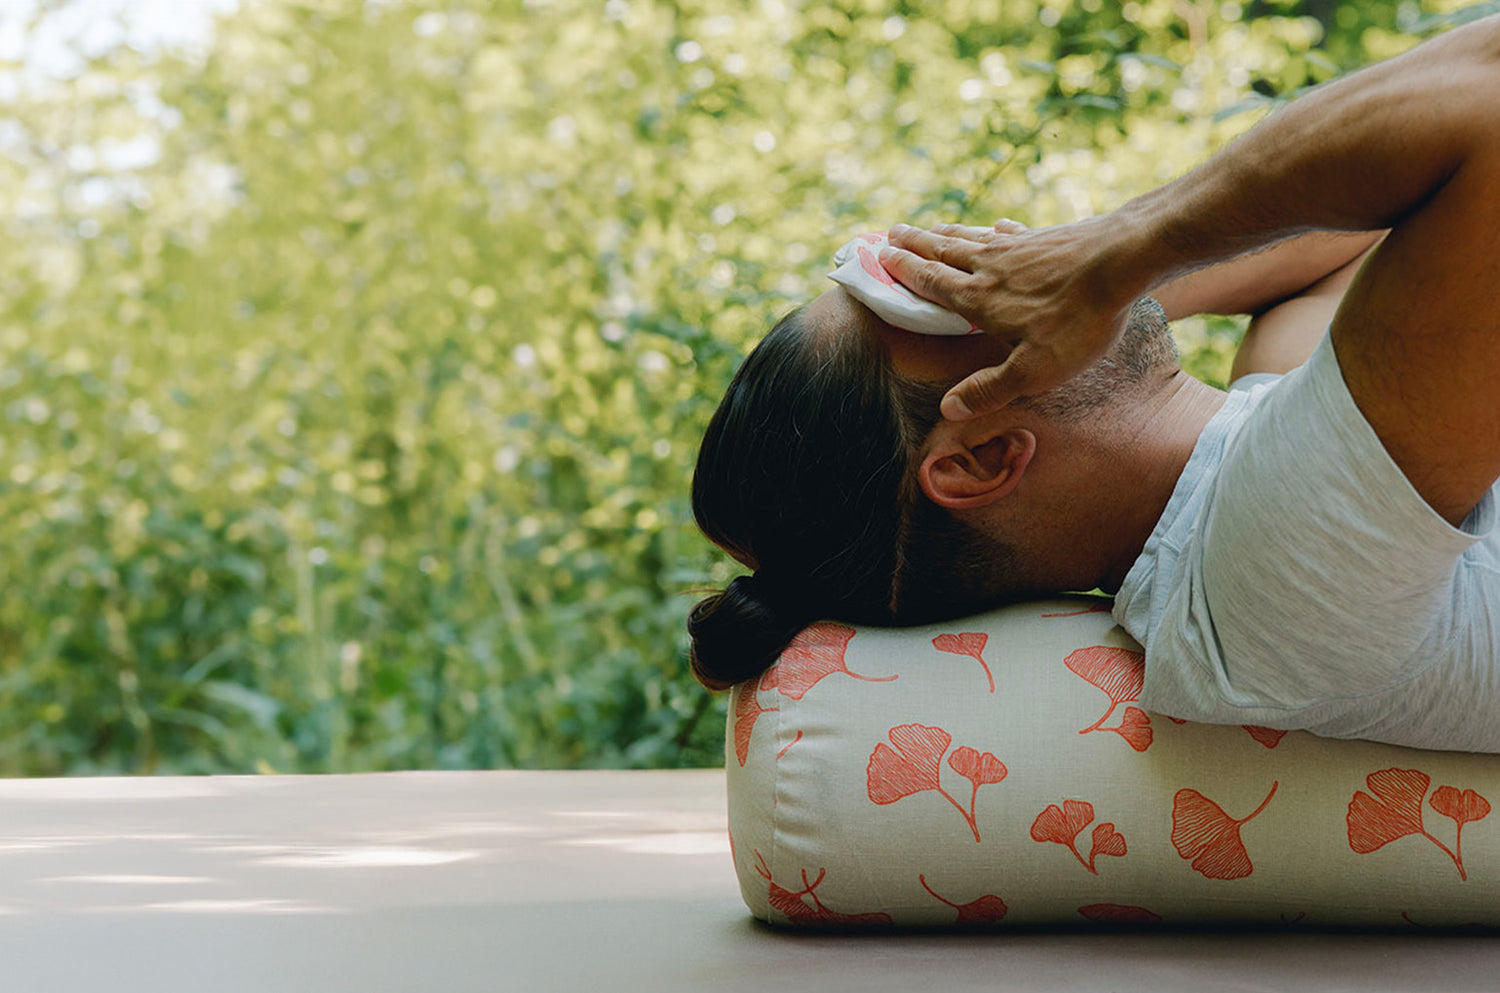 6 Easy Restorative Yoga Poses to Naturally Lower Cortisol | Wellness